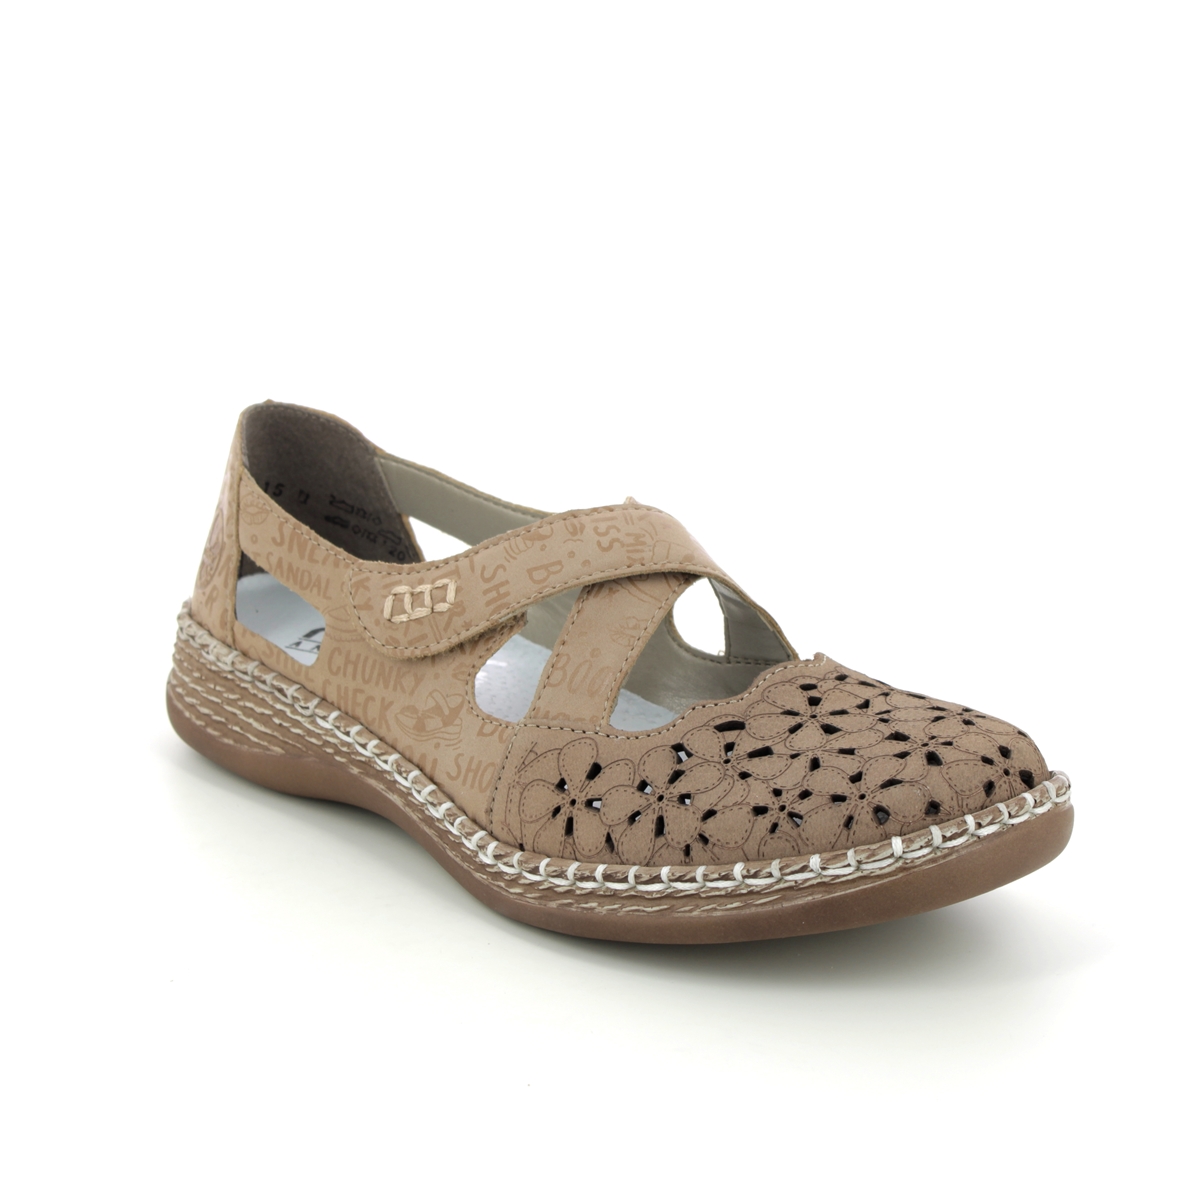 Rieker Daisbeki Light Taupe Leather Womens Mary Jane Shoes 464H4-62 In Size 37 In Plain Light Taupe Leather